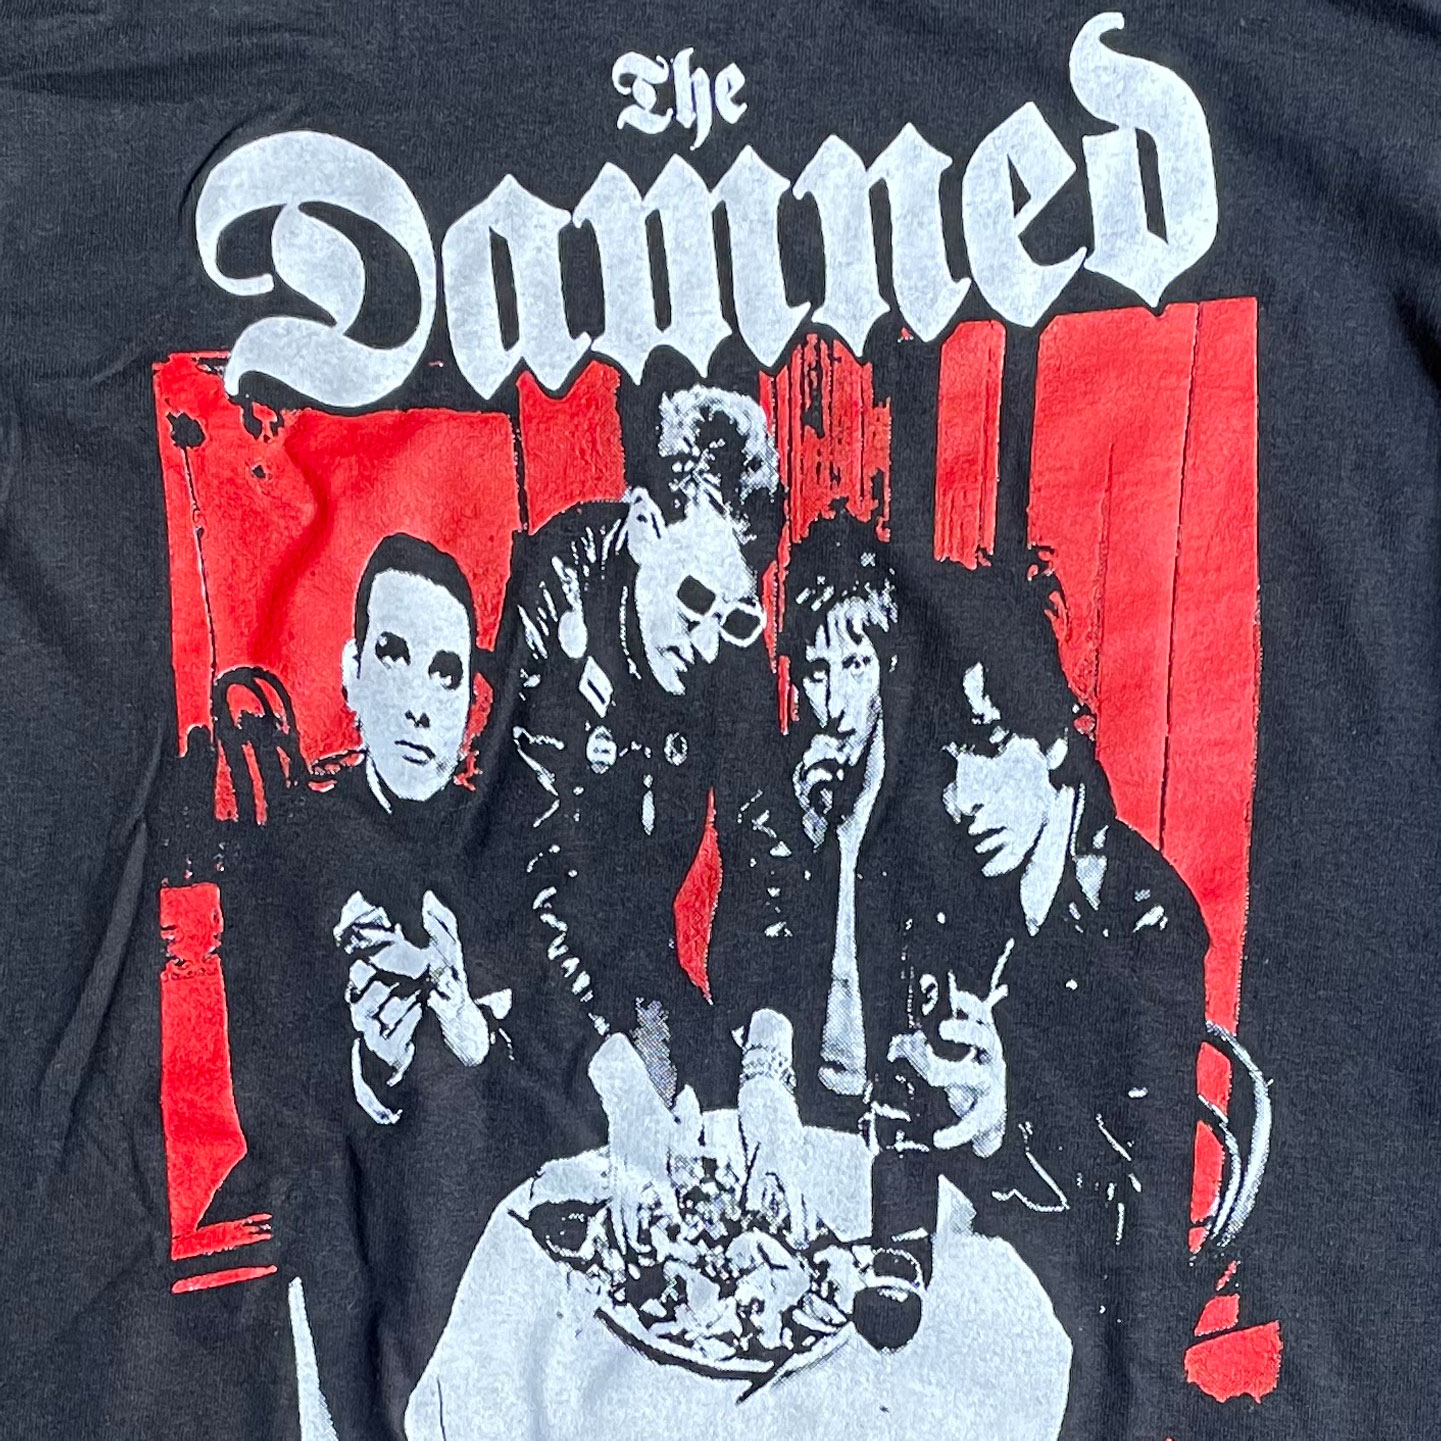 THE DAMNED Tシャツ 食卓